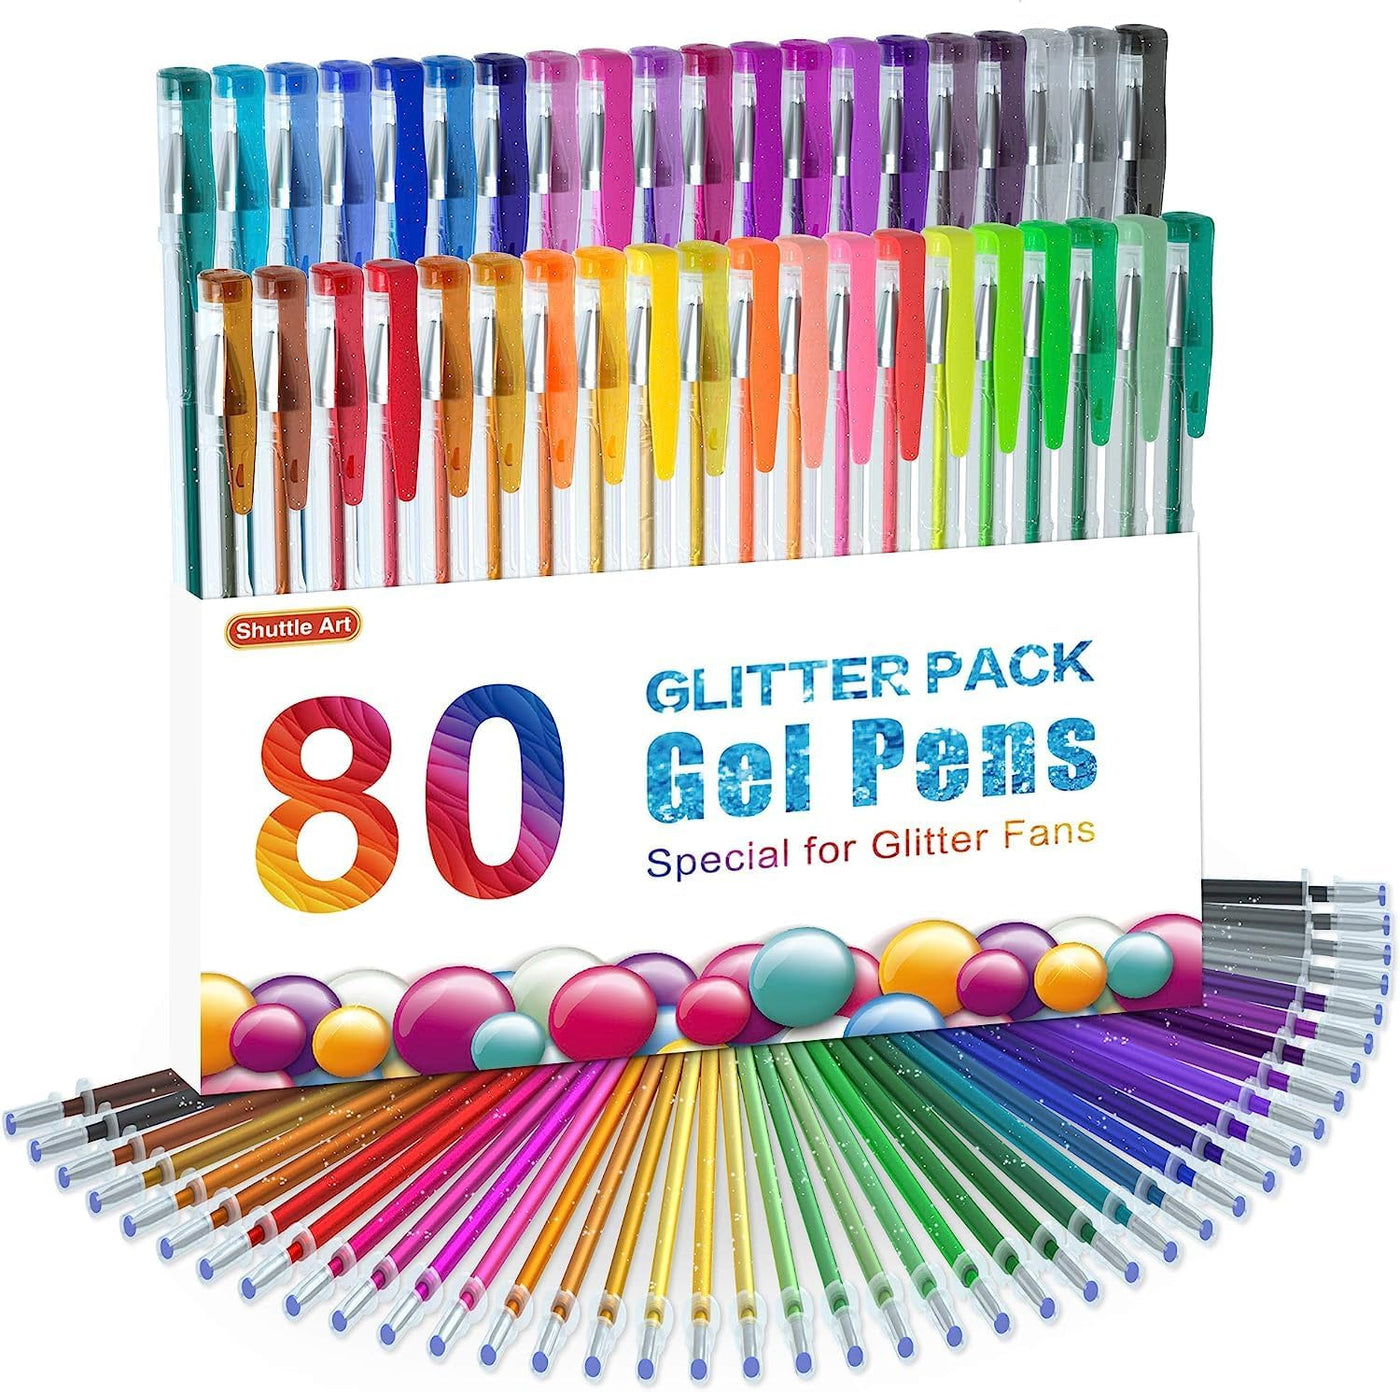 Glitter Gel Pens, 80 Pack Gel Pens 40 Colours Glitter Gel Pen Set with 40 Refills for Adult Colouring Books Doodling Drawing Writing